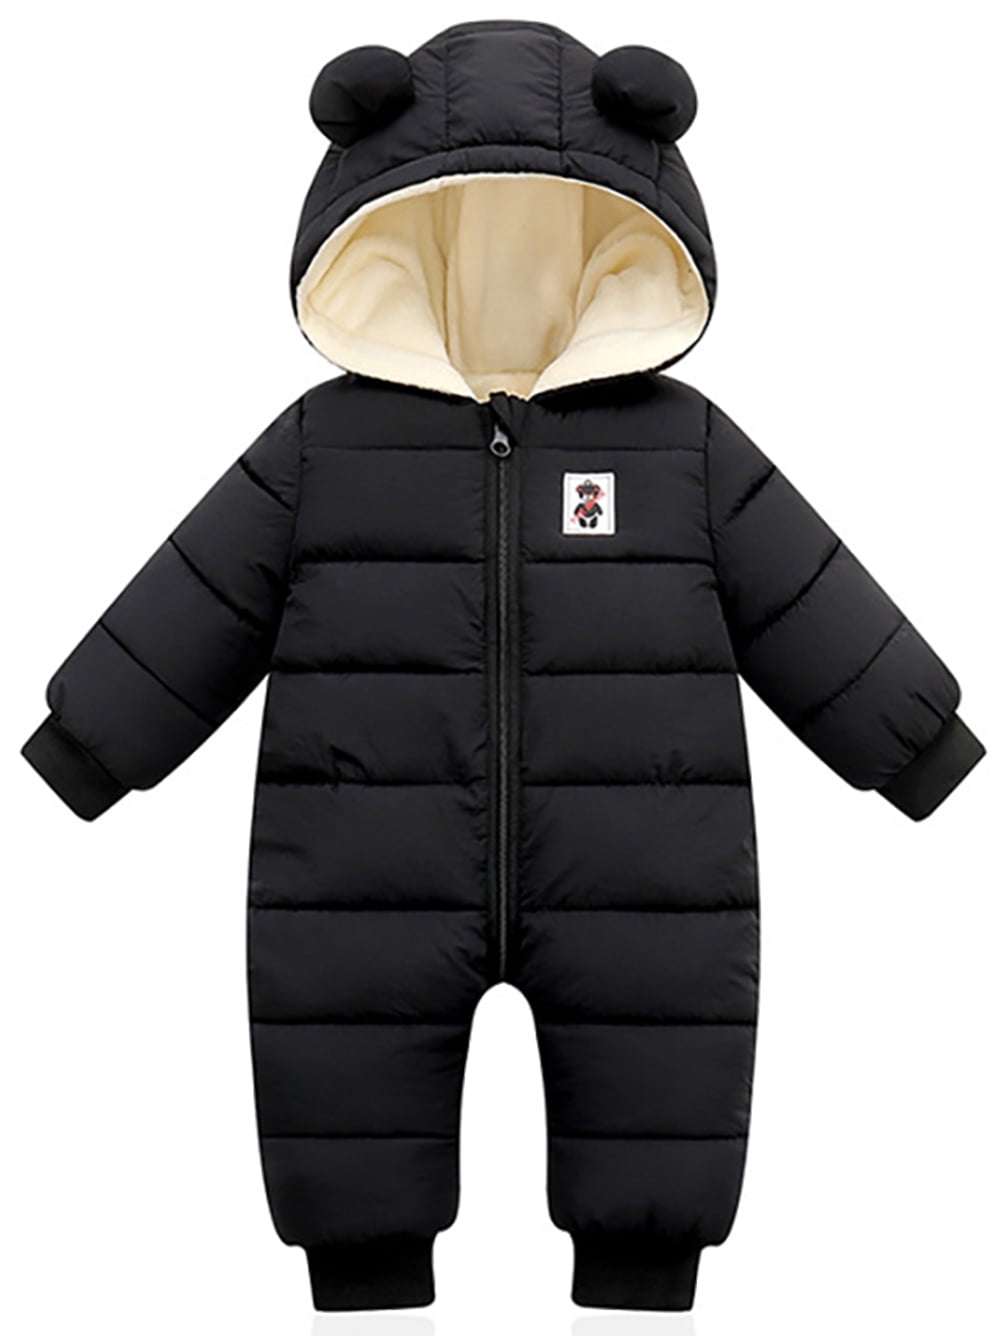 Hooded Romper for Baby Boys Girls Winter Snowsuit Warm Coat Long Sleeve Outfits Jumpsuit Gift 0-24 Months 